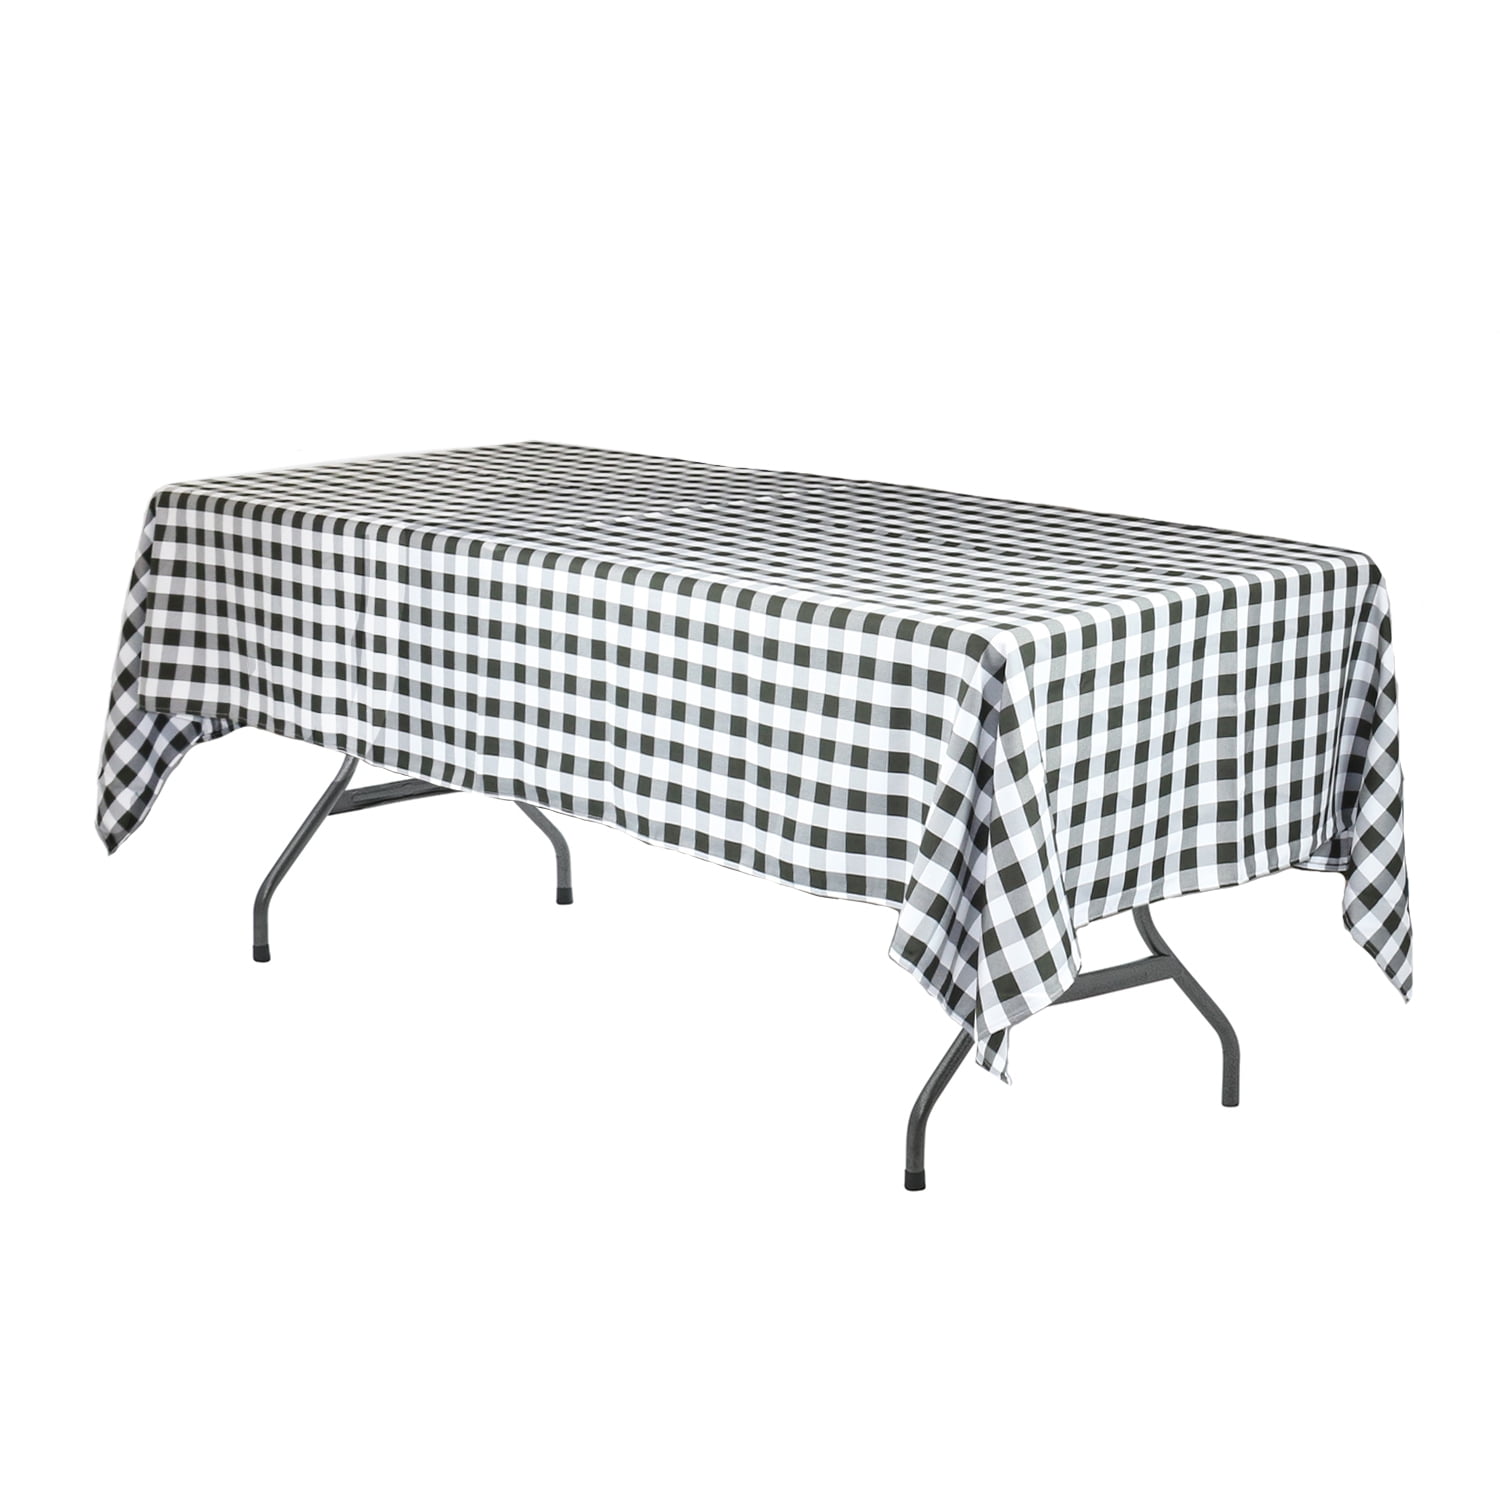 Your Chair Covers 60 X 102 Inch Rectangular Polyester Tablecloth Gingham Checkered Black